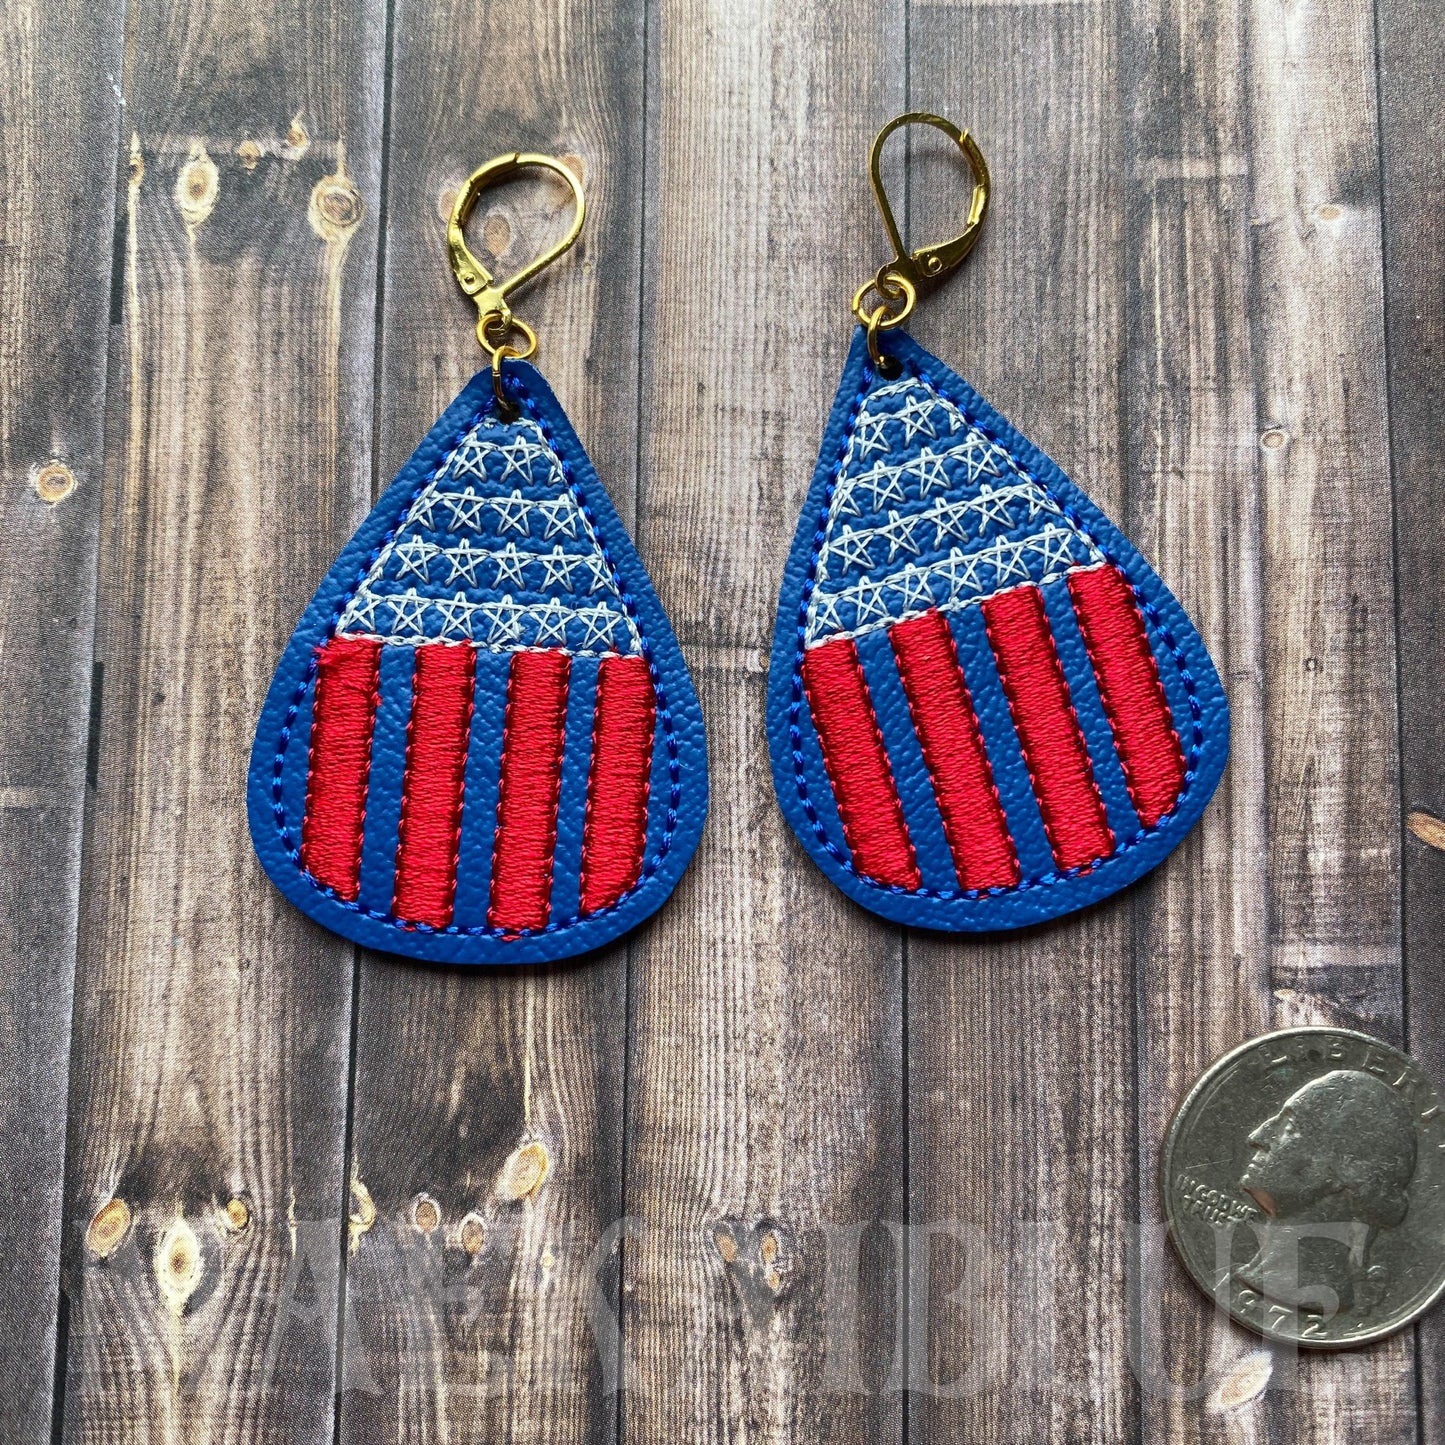 Stars and Stripes Earrings - 2 Sizes - Digital Embroidery Design